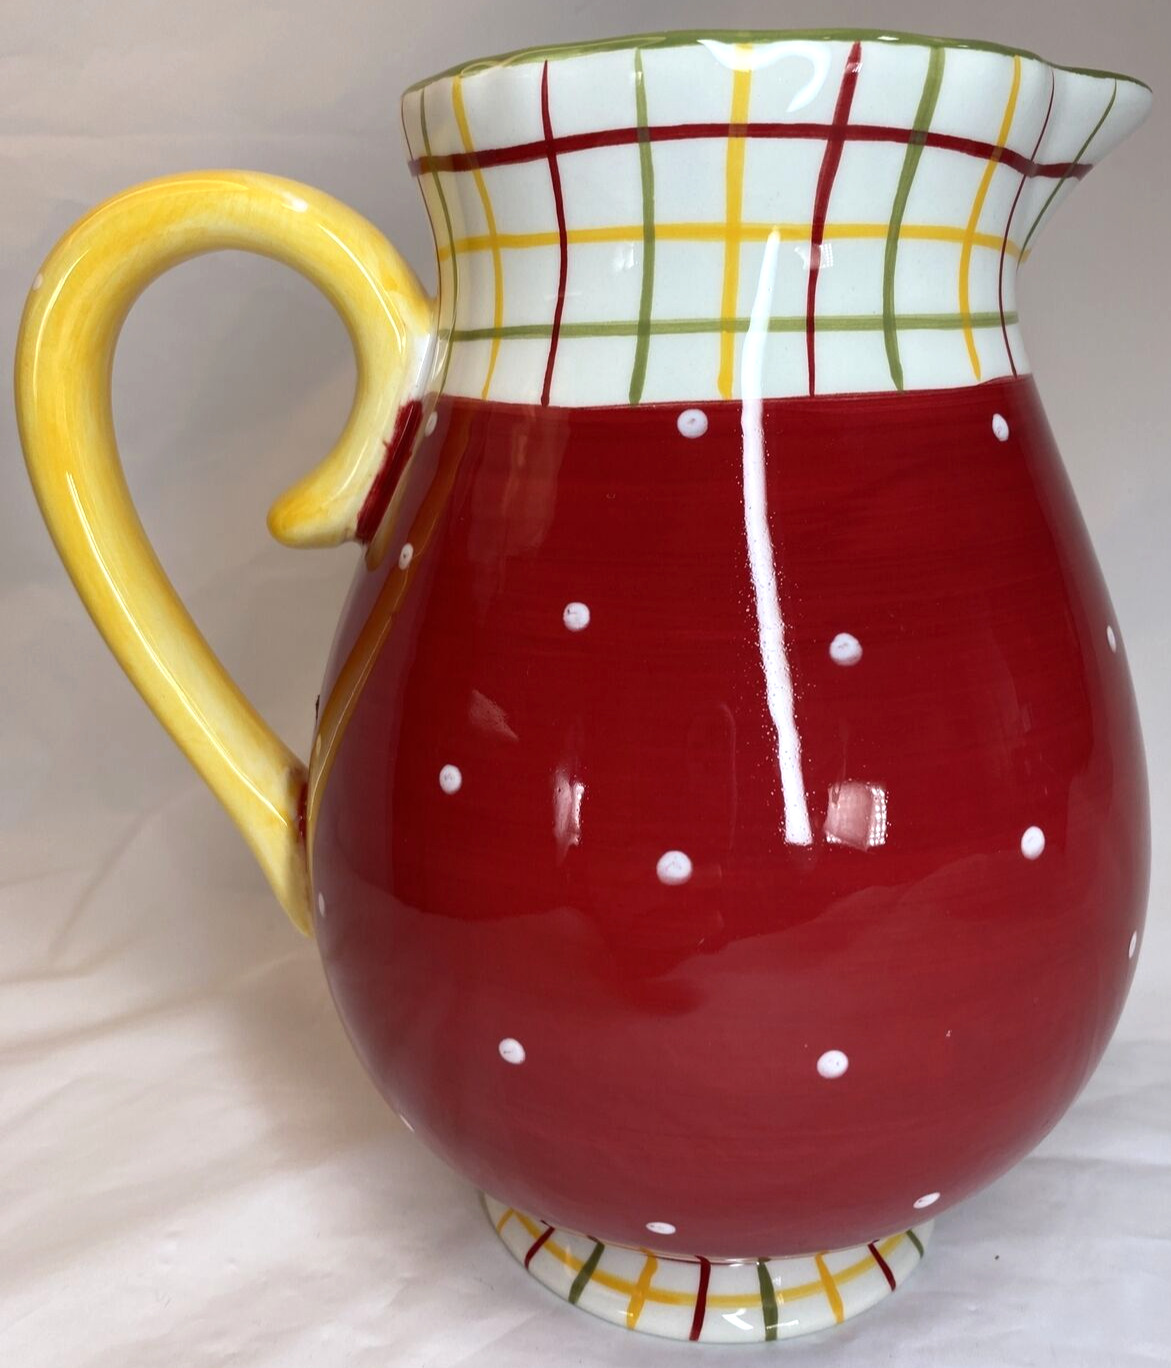 Roscher & Co. Earthenware “Harmony Collection” Footed 2 Quart Pitcher